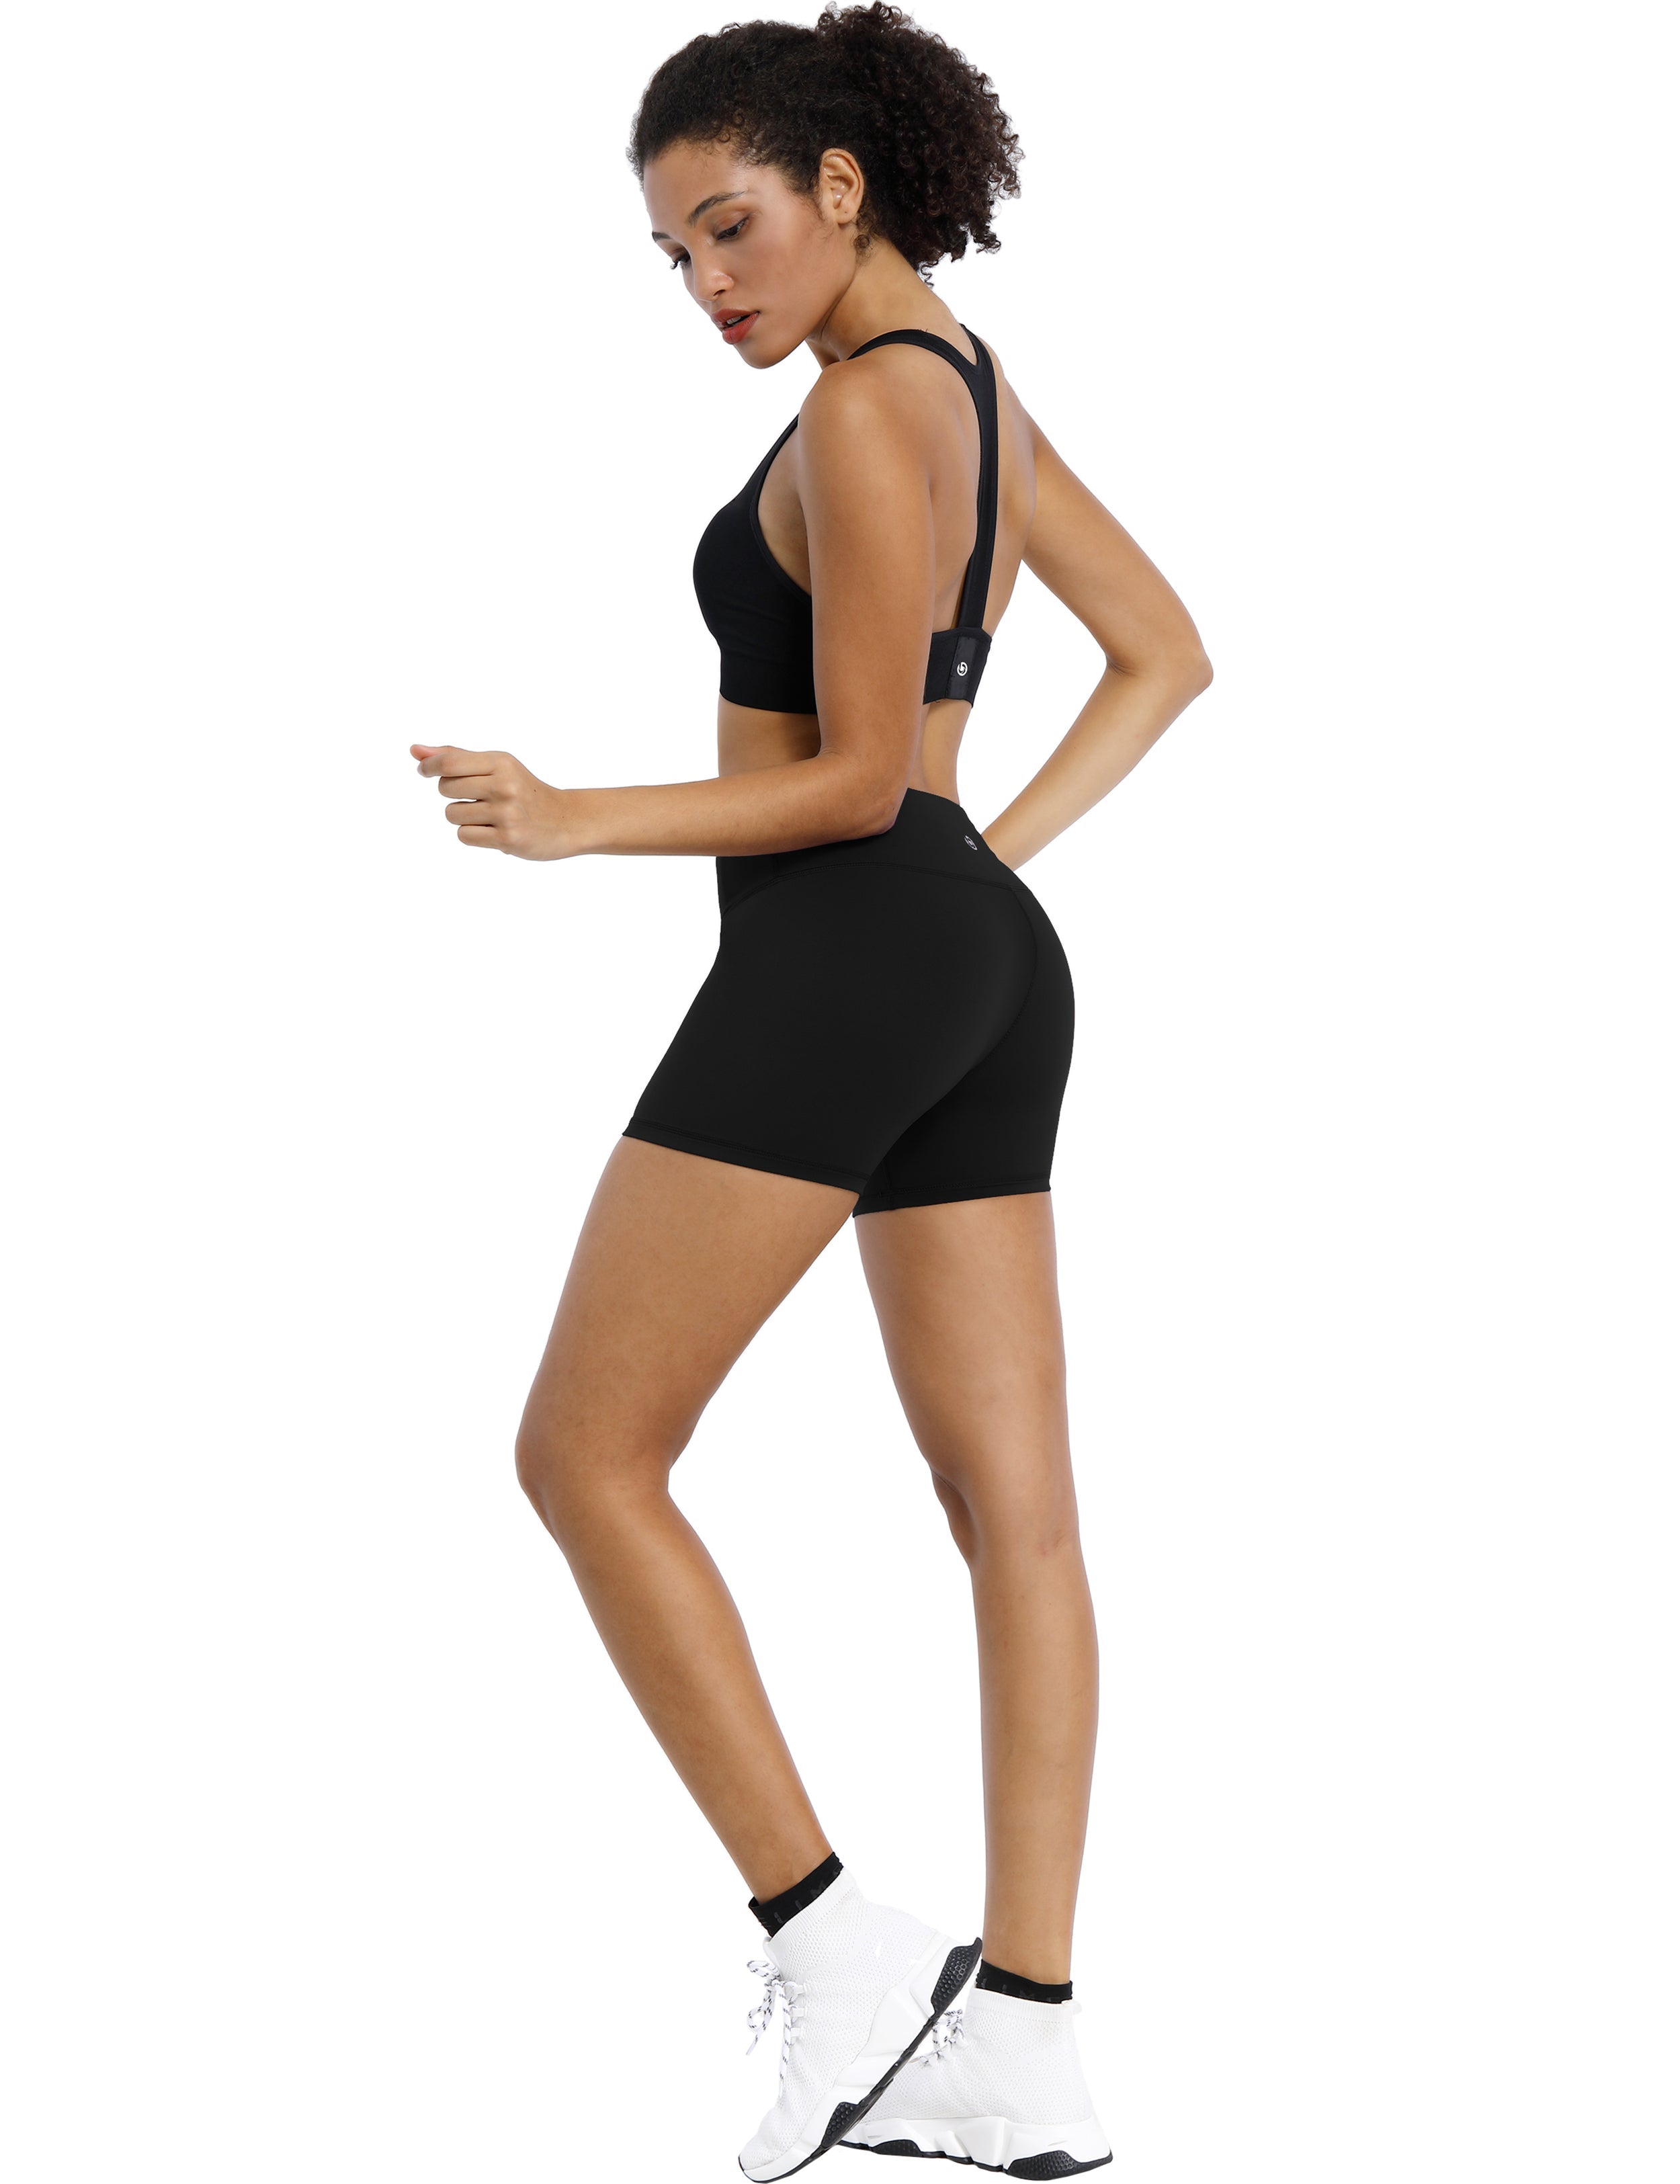 4" Golf Shorts black Sleek, soft, smooth and totally comfortable: our newest style is here. Softest-ever fabric High elasticity High density 4-way stretch Fabric doesn't attract lint easily No see-through Moisture-wicking Machine wash 75% Nylon, 25% Spandex